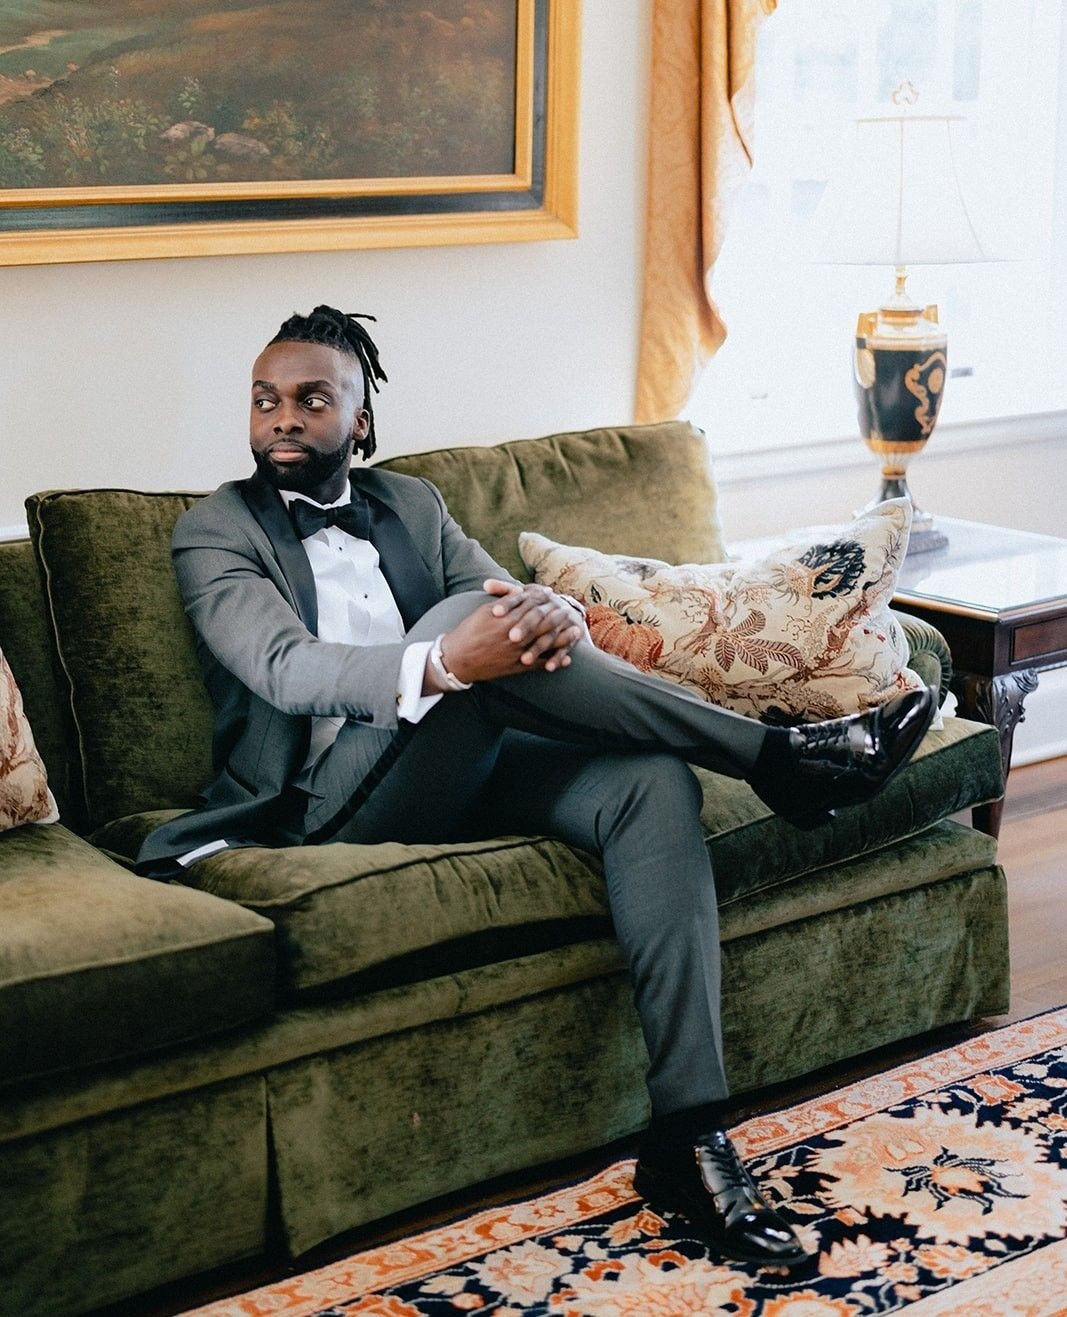 Oh so sharp and dapper groom's look ✔️ Brides are the only ones that can have fun with their attire! We adore a groom with style ⧓⁠
⁠
Coordination | @aniwolff_⁠
Clients | @cltrank @powusu2⁠
Venue |  @tpcjasnapolanaweddings⁠
Florals | @lauraclaredesig